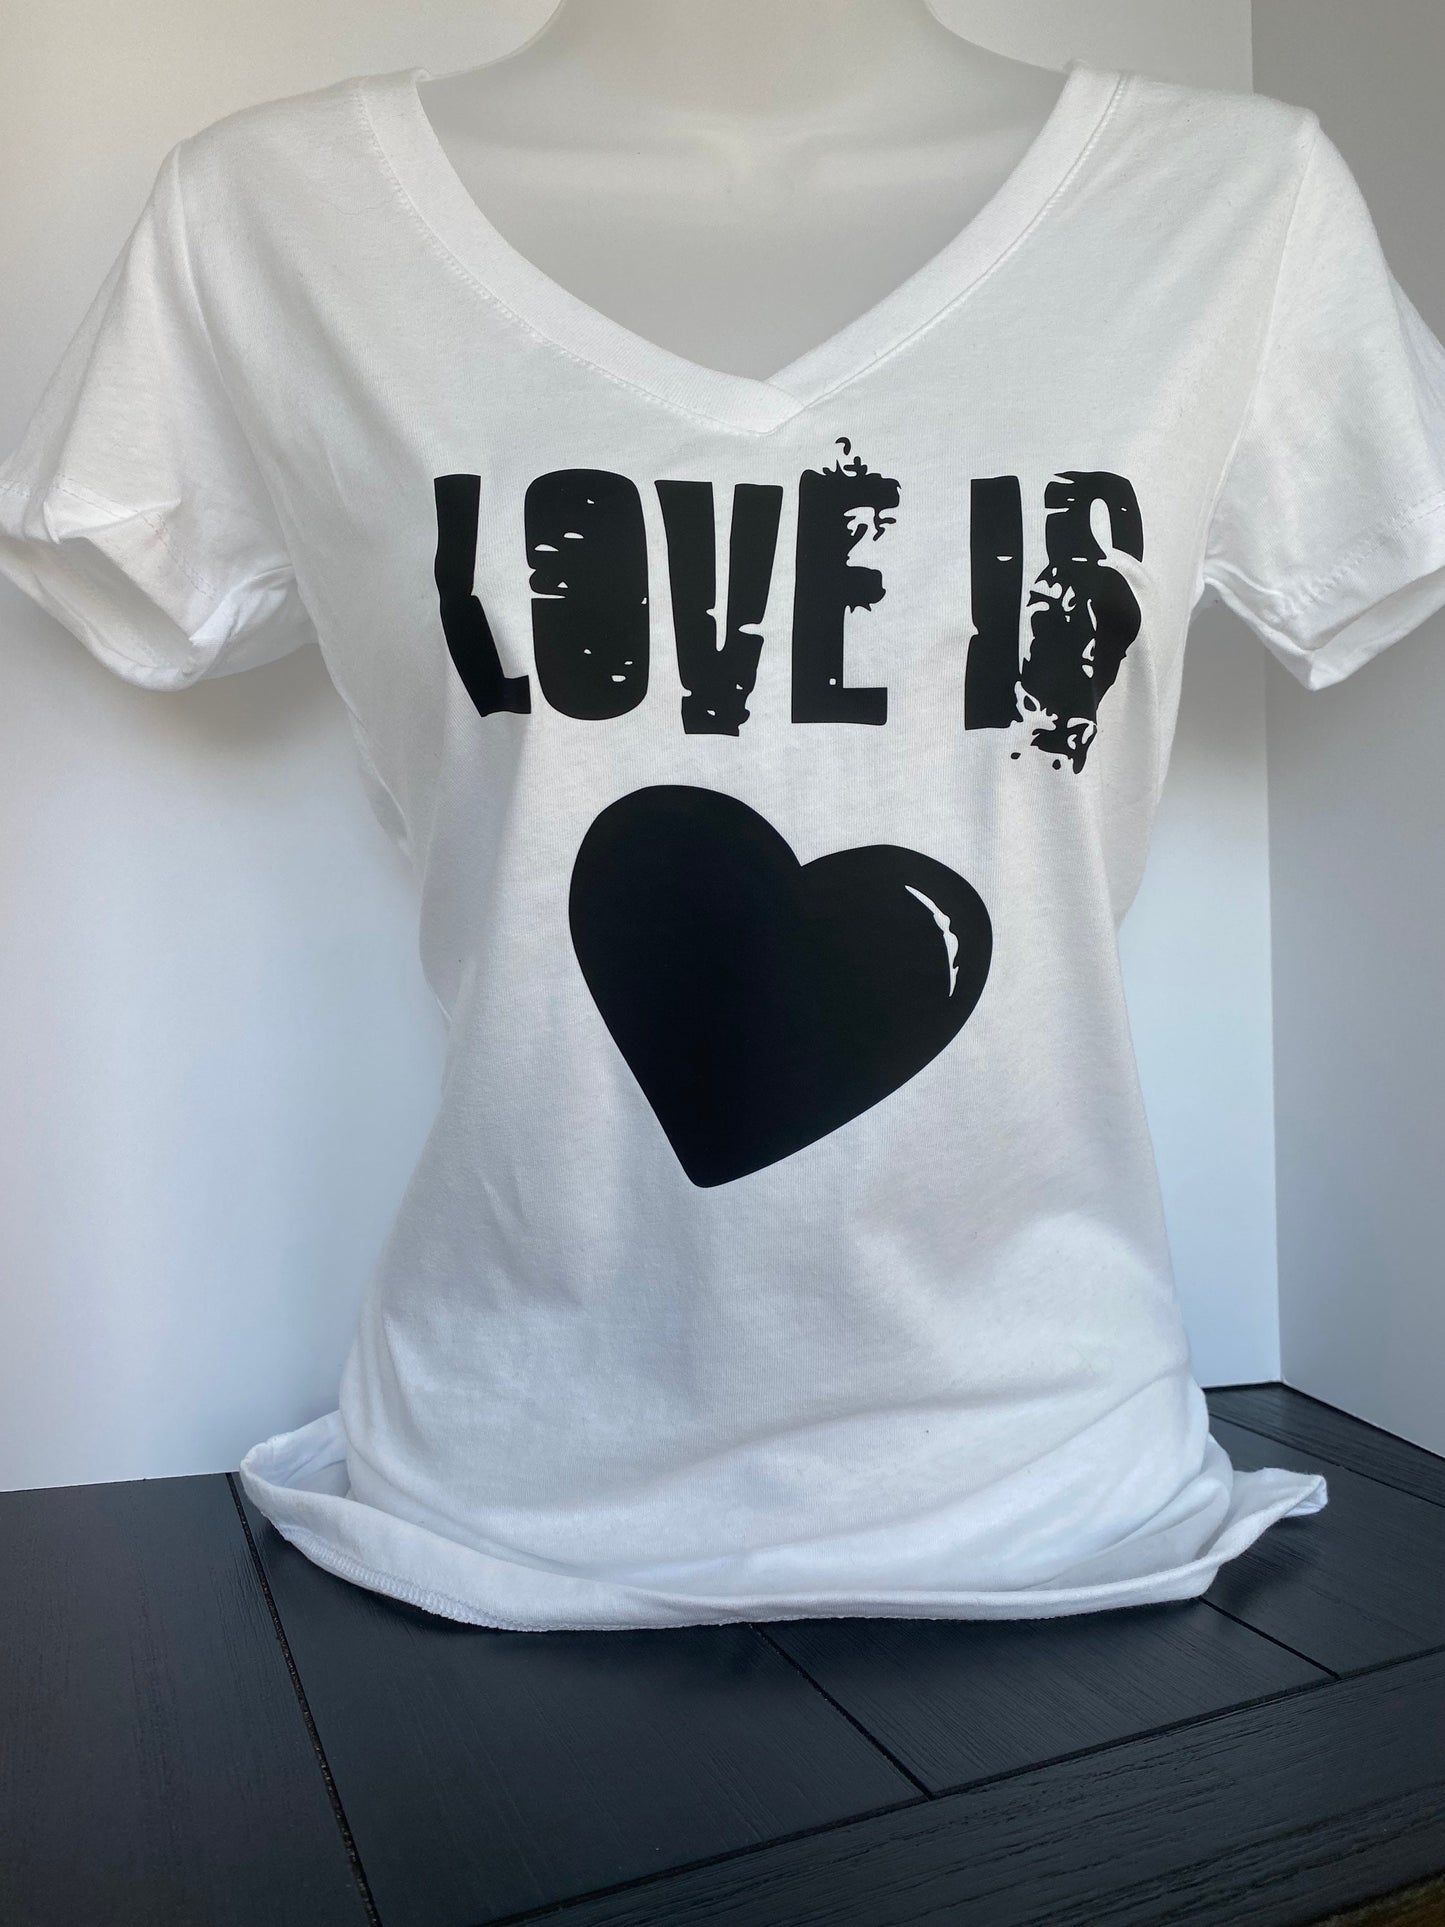 Love is T-shirt, Tank, Hoodie, or Tote, Positive Message, Love is Love, Modern Minimalist Clothing, Unique T-Shirt